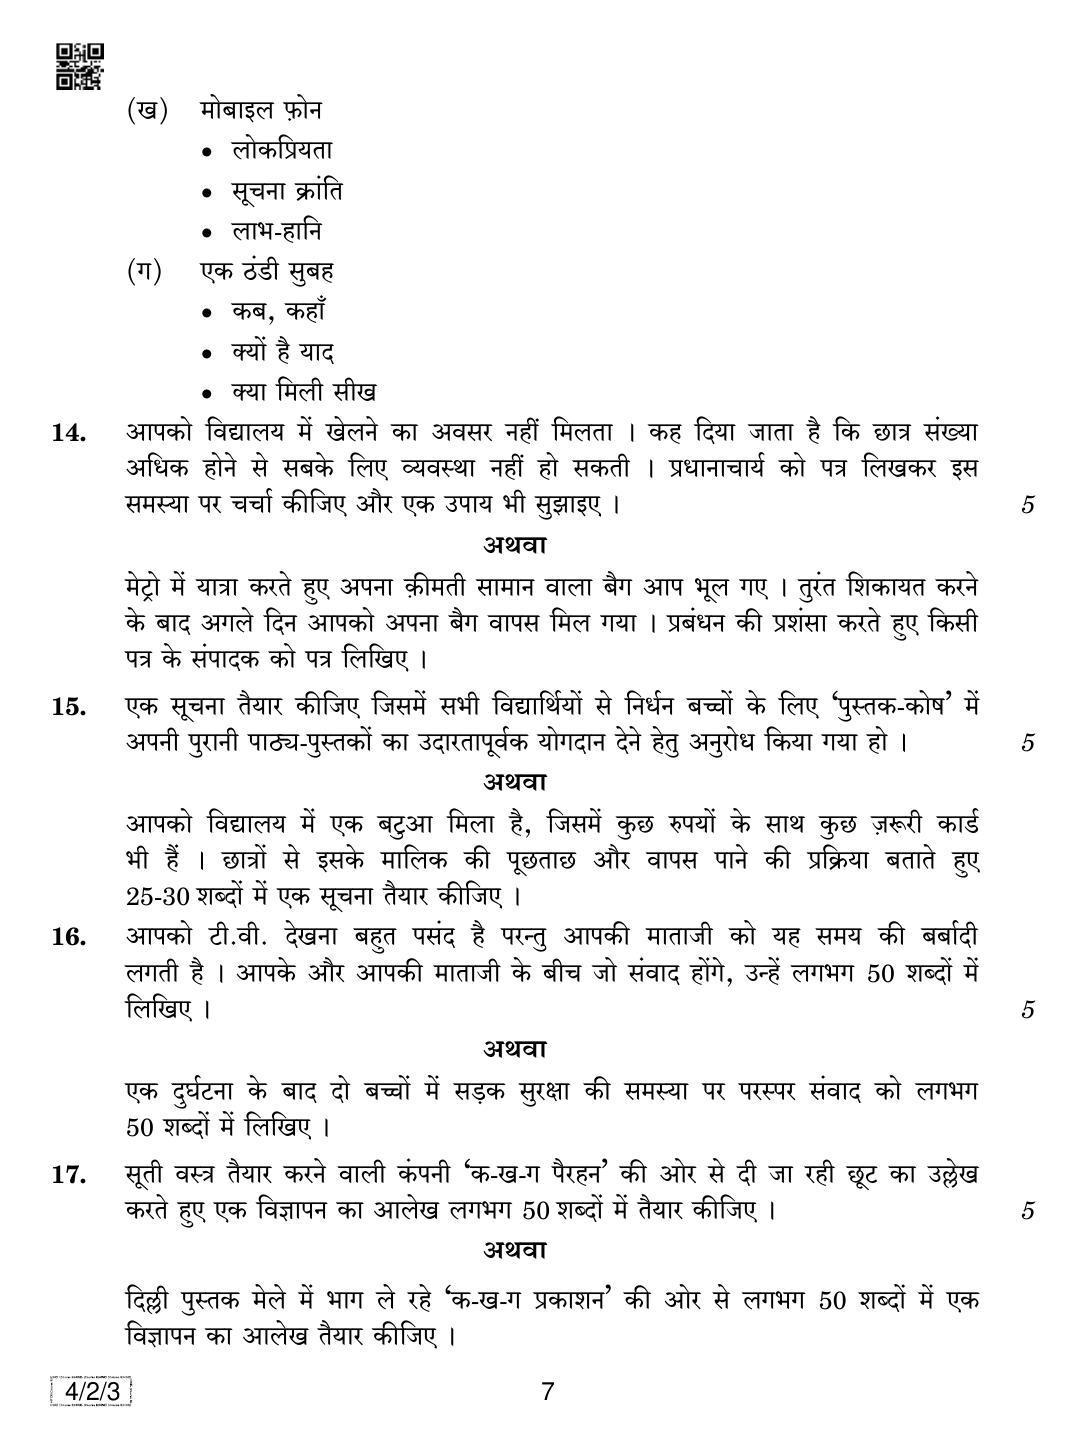 CBSE Class 10 4-2-3 HINDI COURSE- B 2019 Question Paper - Page 7